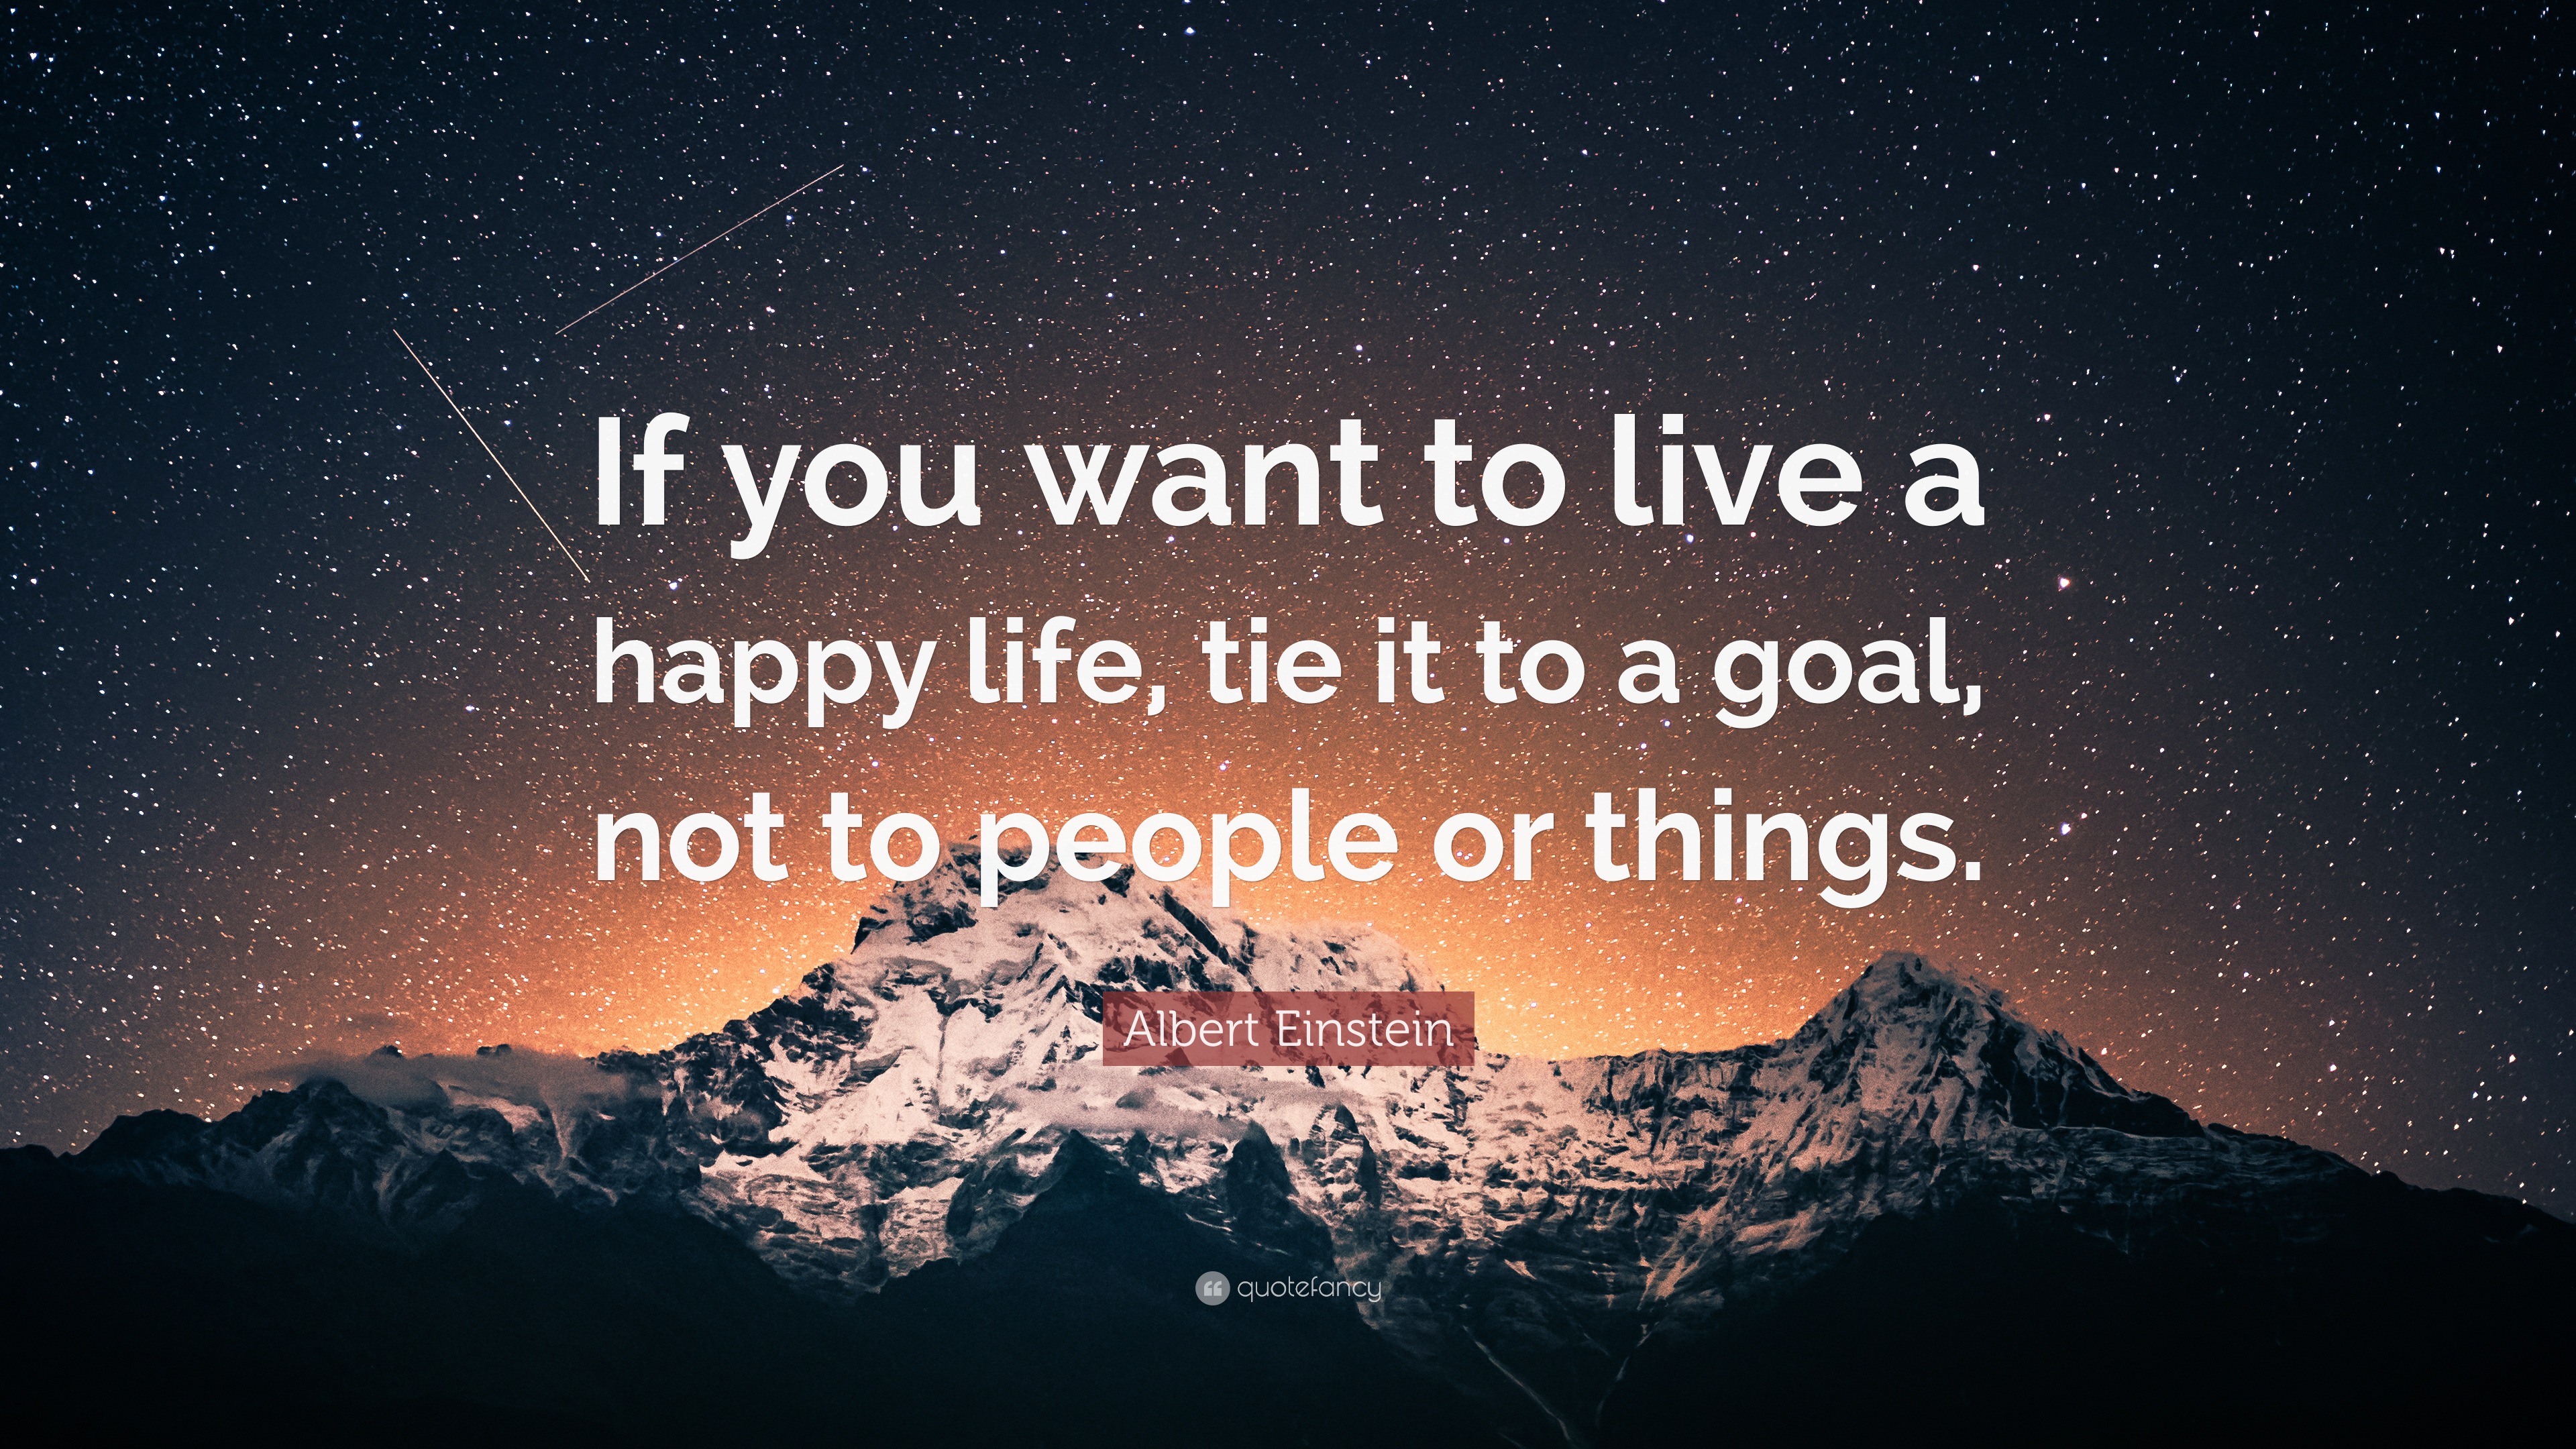 Albert Einstein Quote “If you want to live a happy life